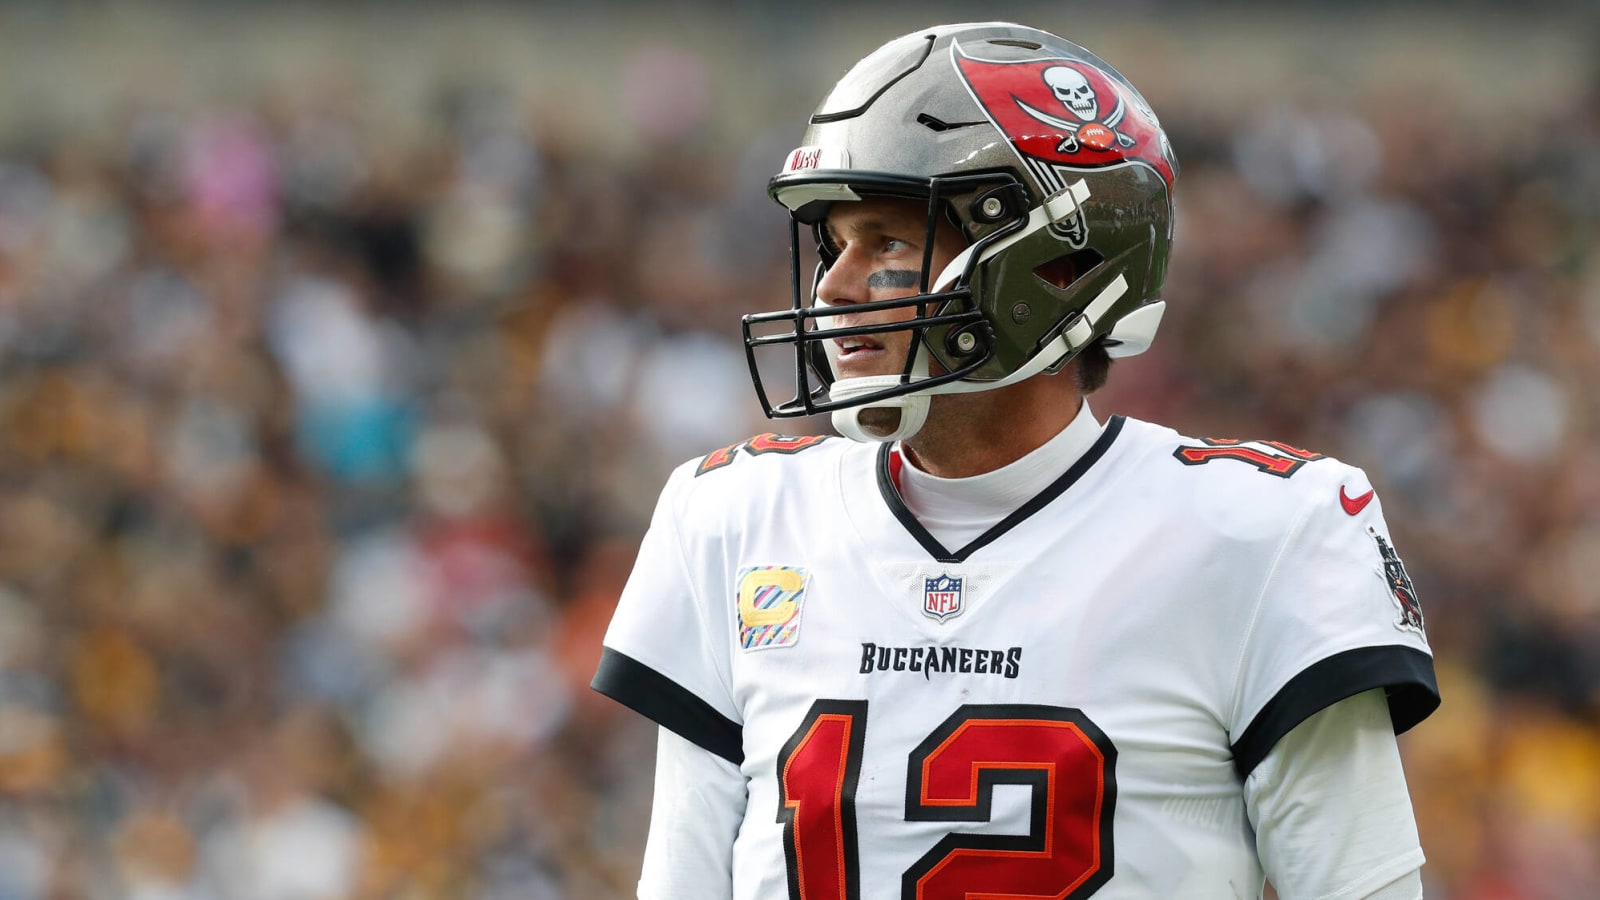 Do Next Gen Stats prove Buccaneers' Tom Brady is finally showing his age?